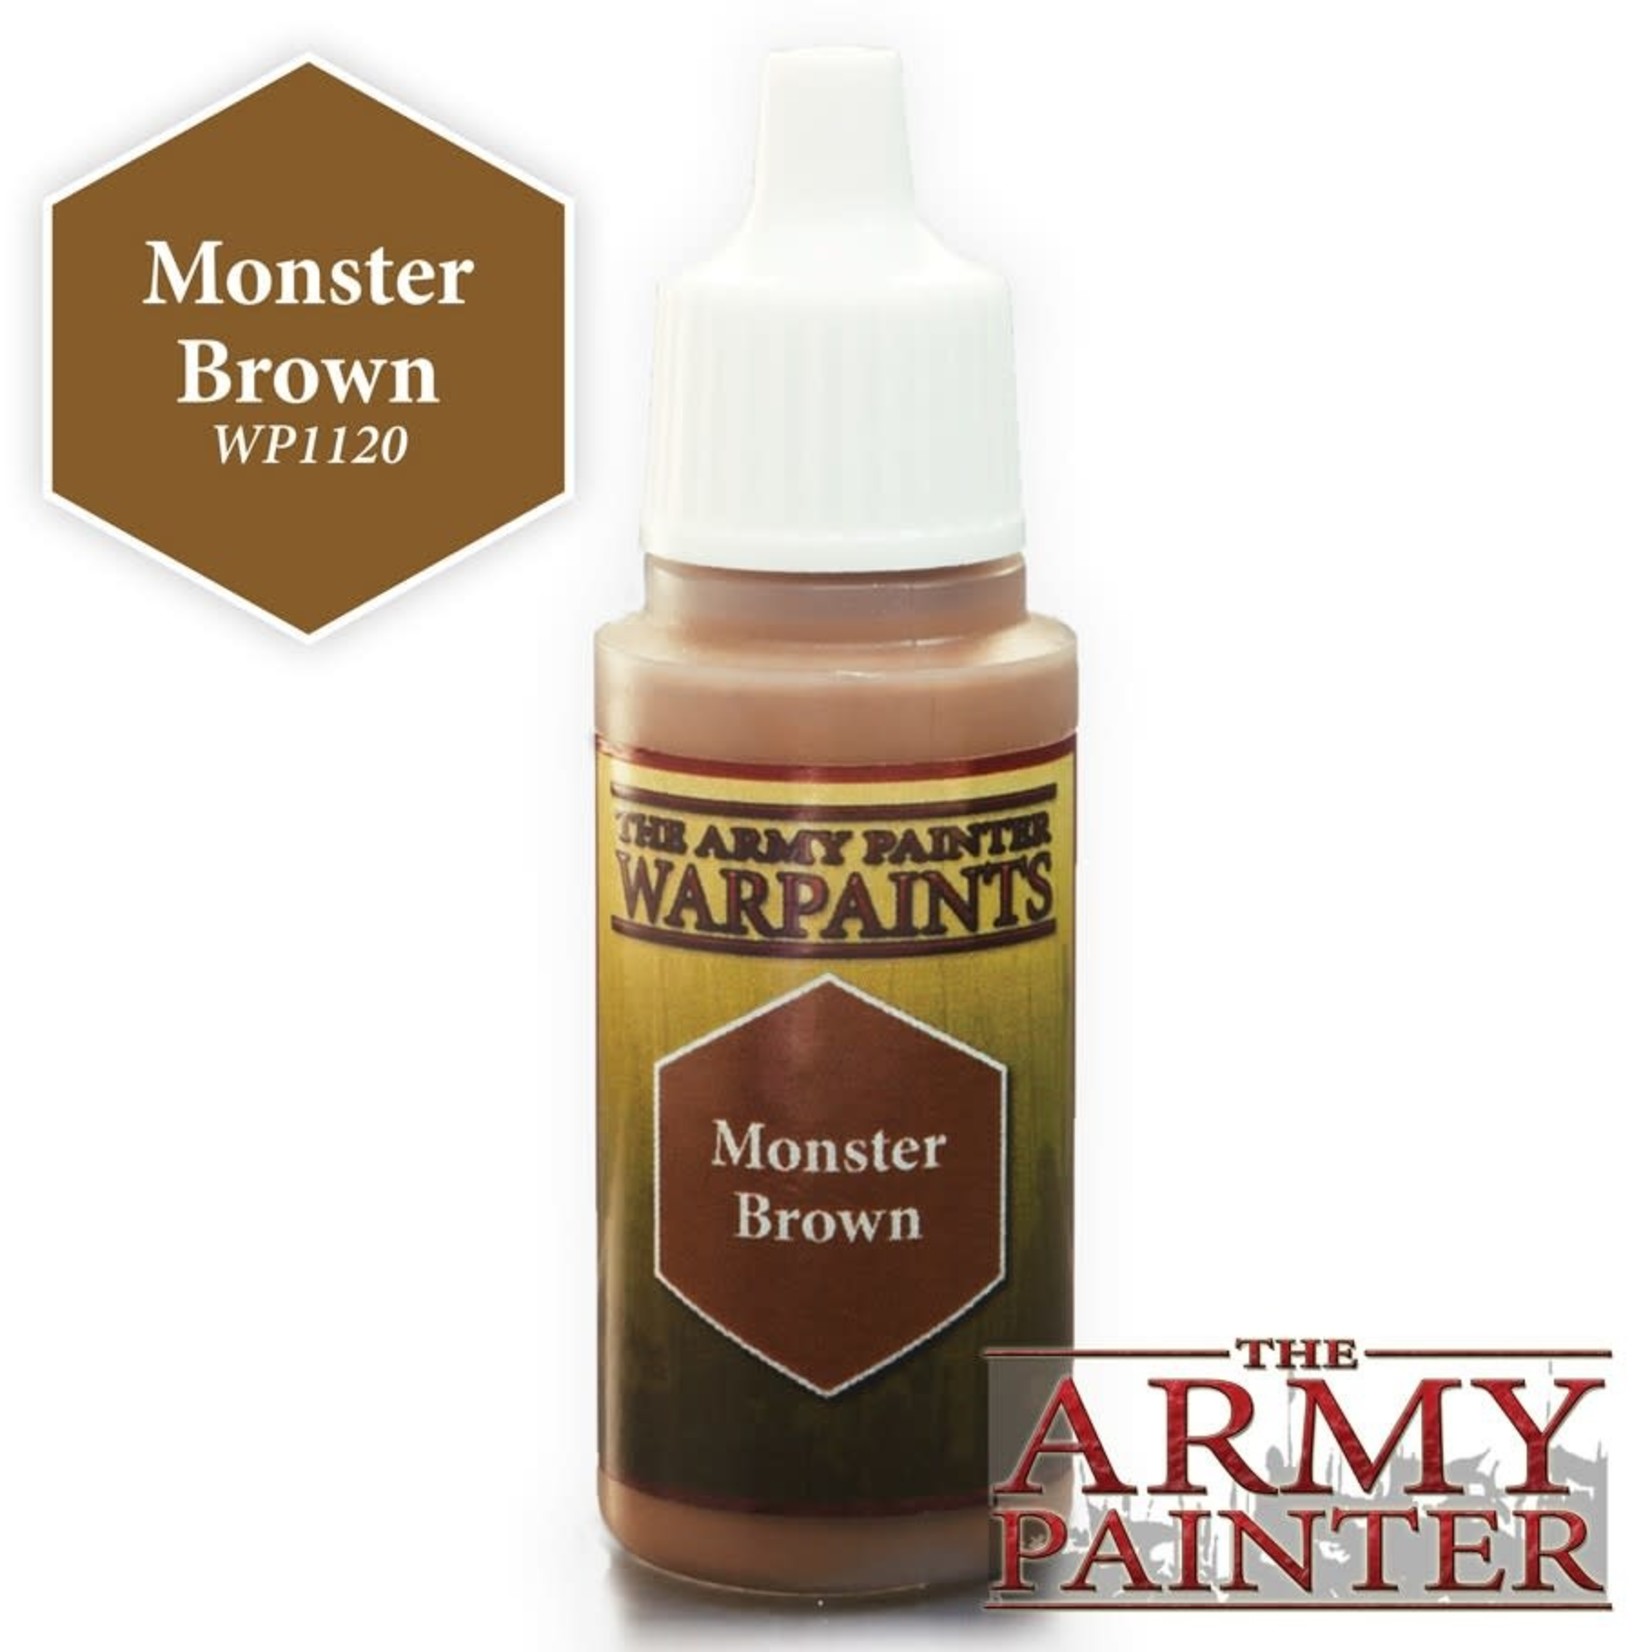 The Army Painter Warpaints: Monster Brown